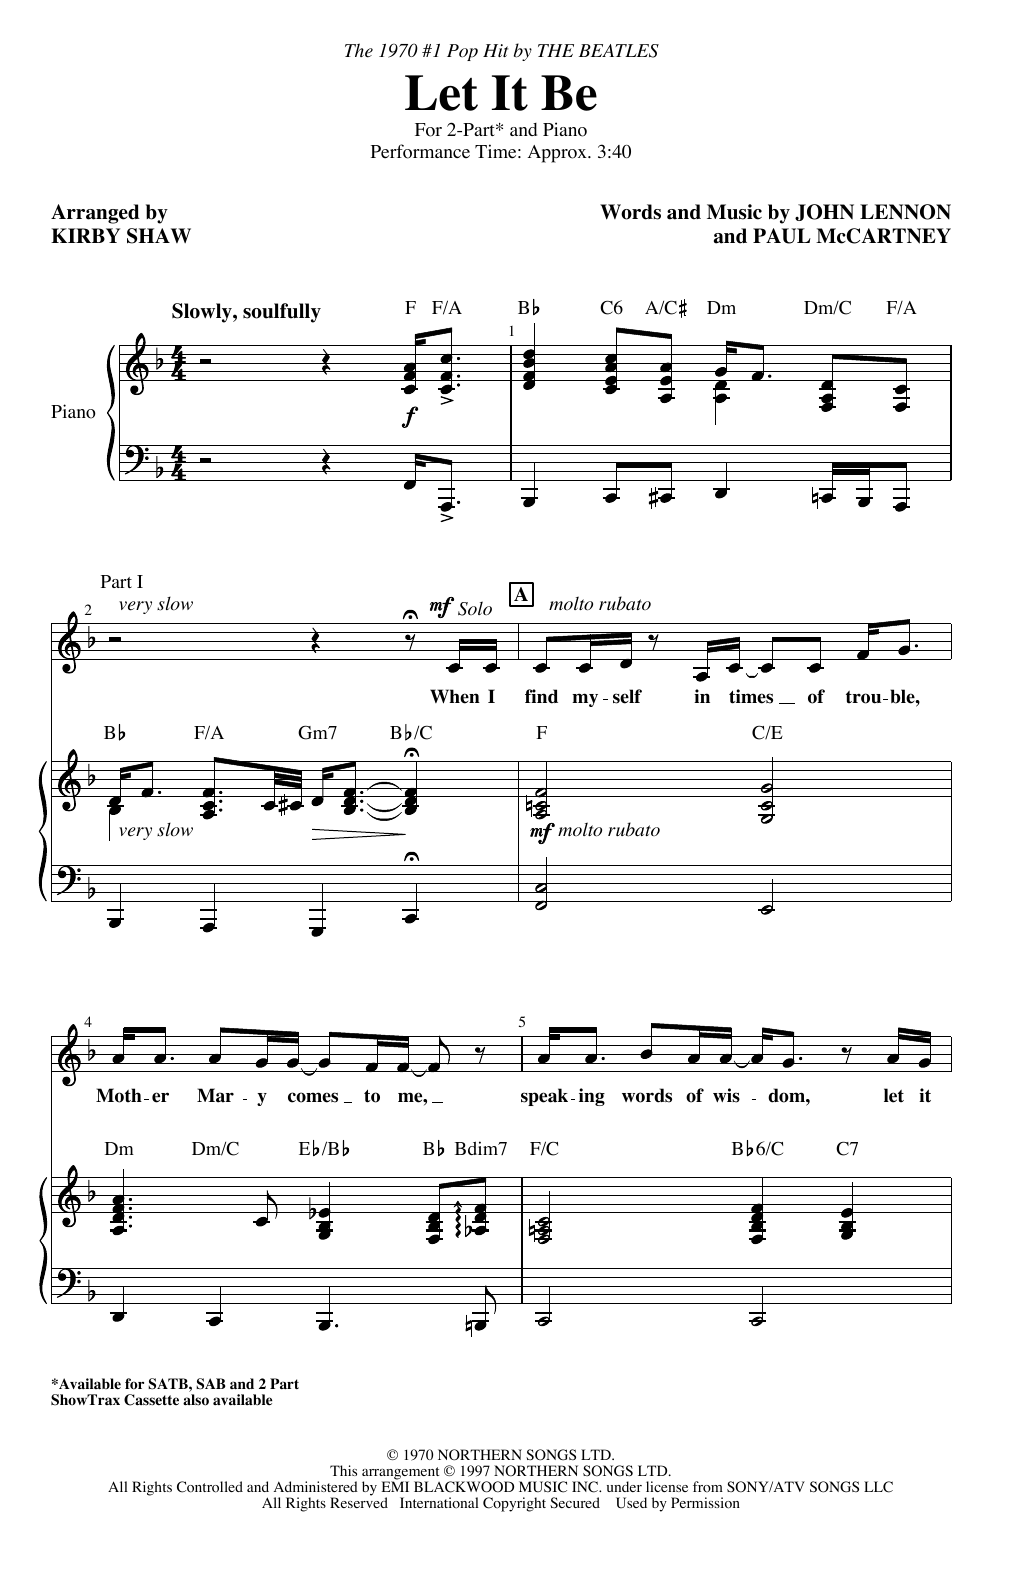 Download The Beatles Let It Be (arr. Kirby Shaw) Sheet Music